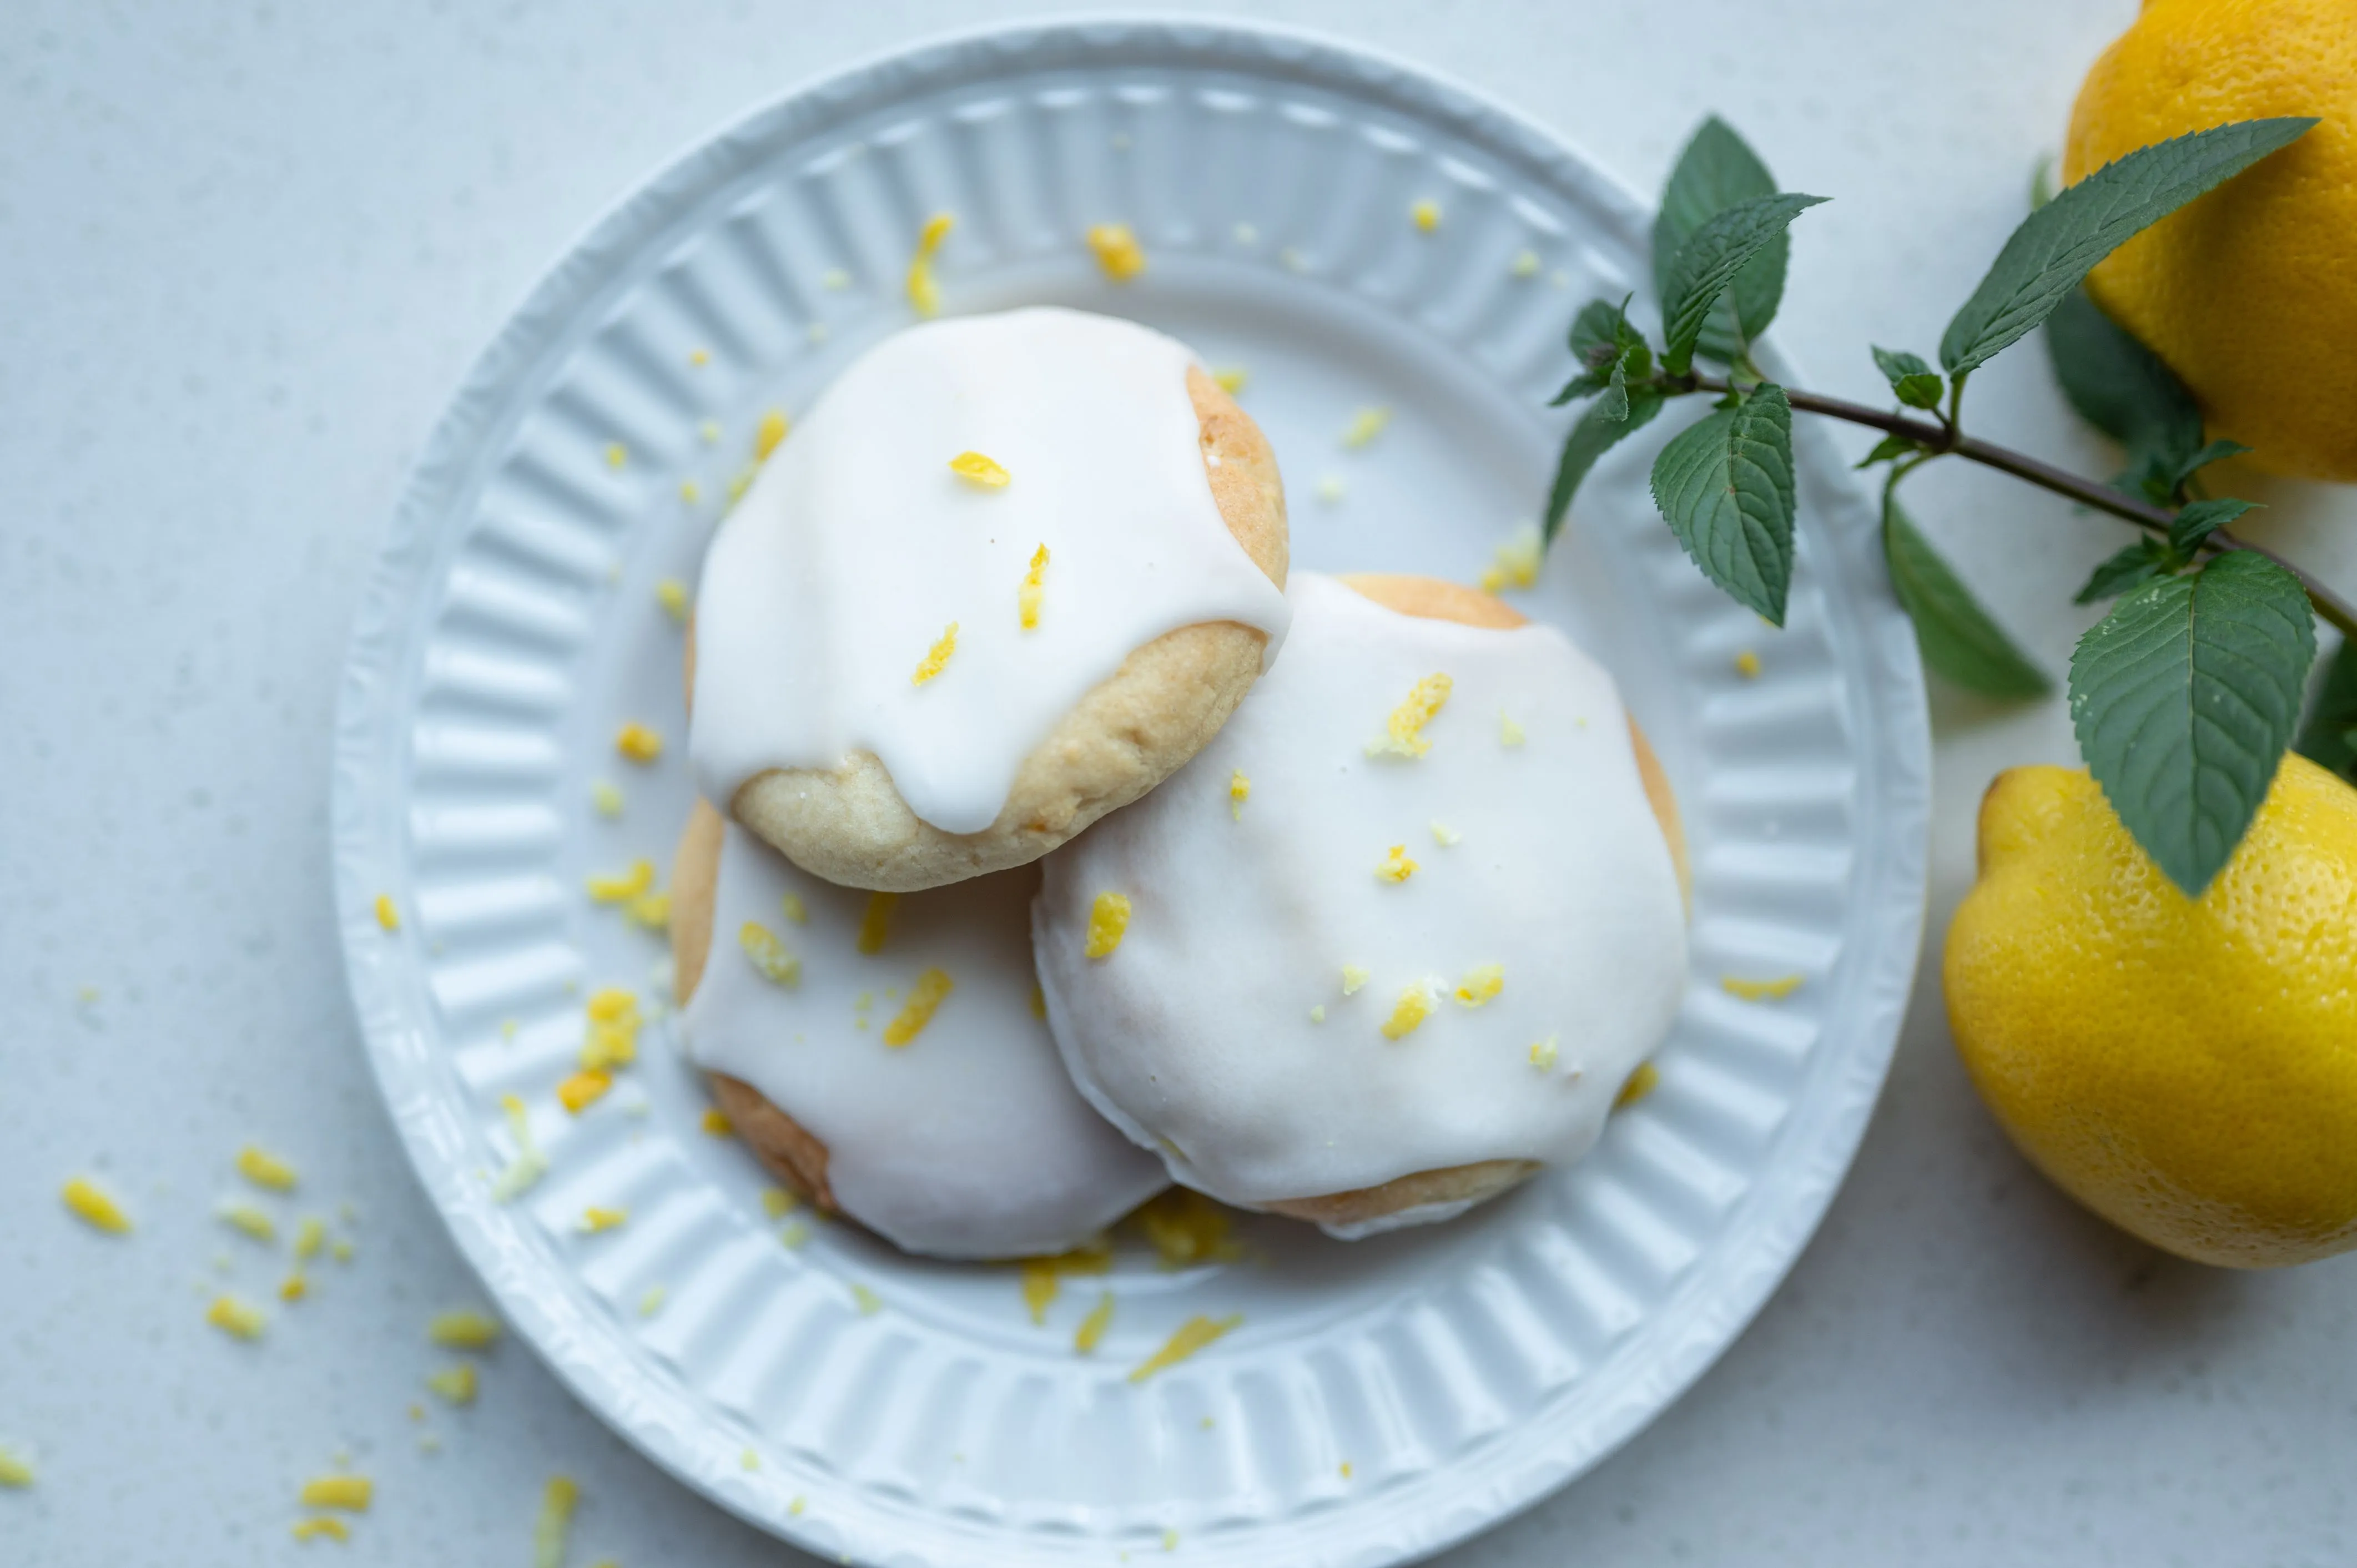 Plate of lemon cookies with white icing and lemon zest on top, next to fresh lemons and mint leaves.